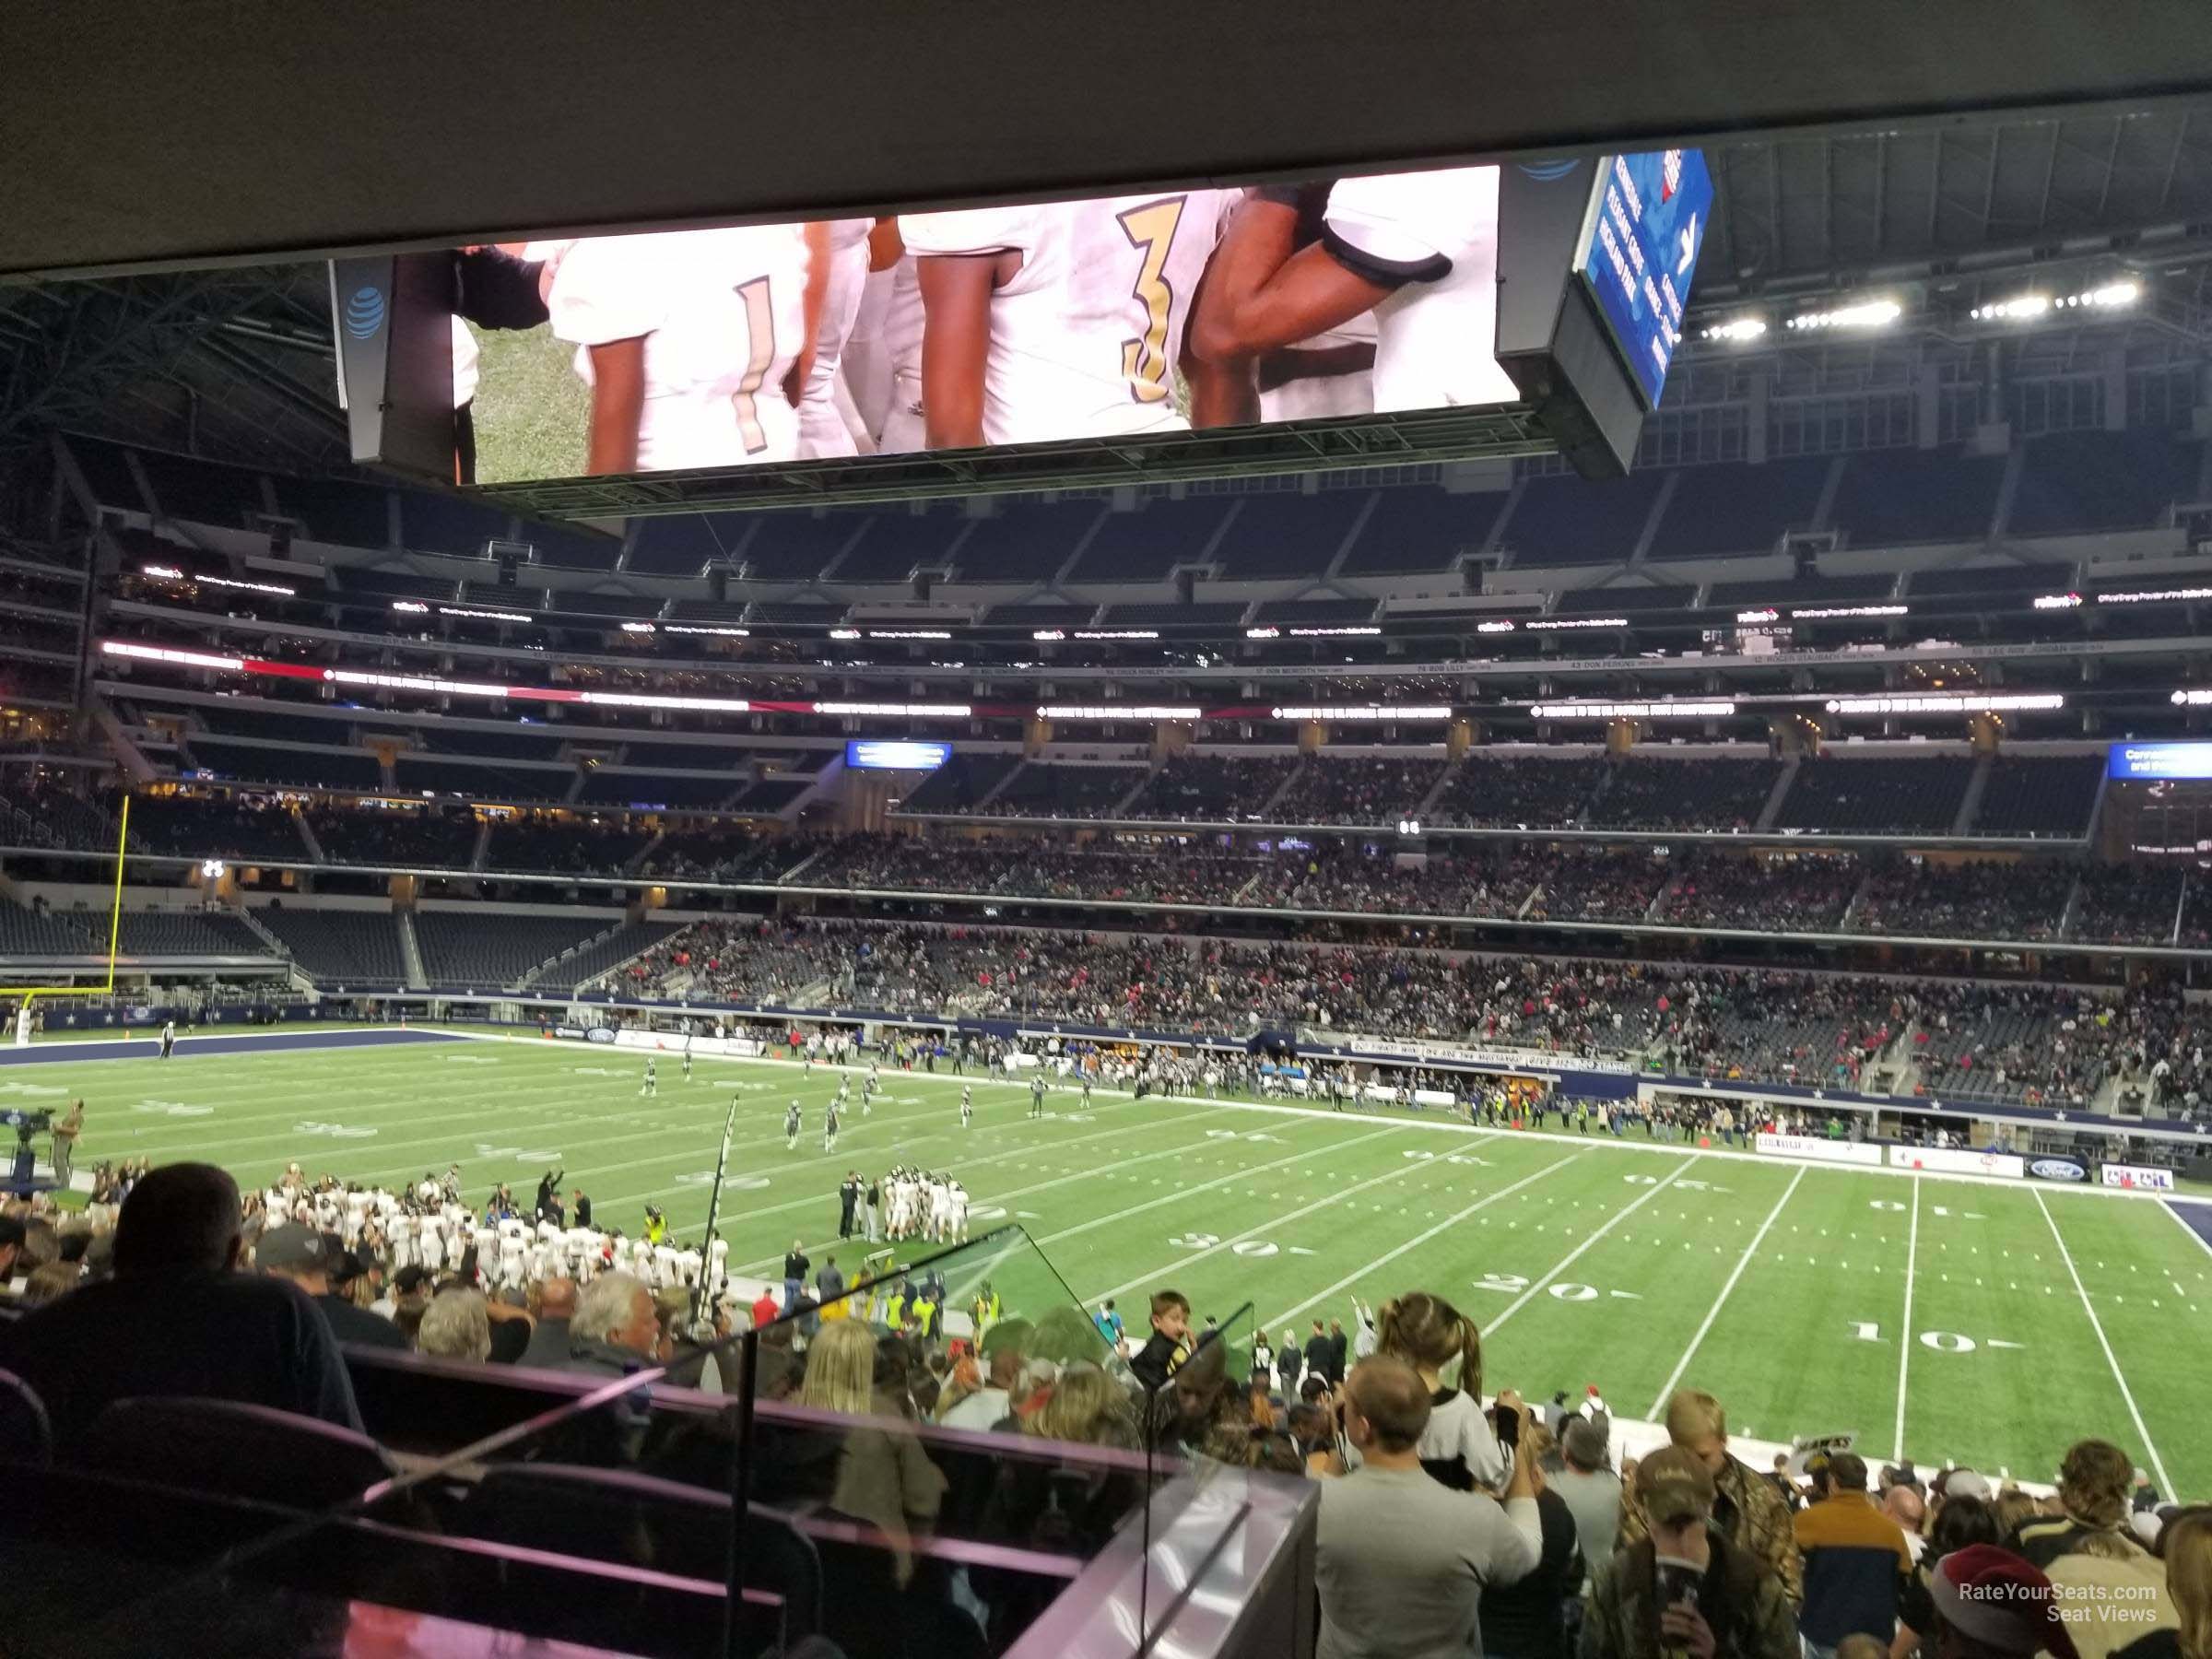 section c132, row 12 seat view  for football - at&t stadium (cowboys stadium)